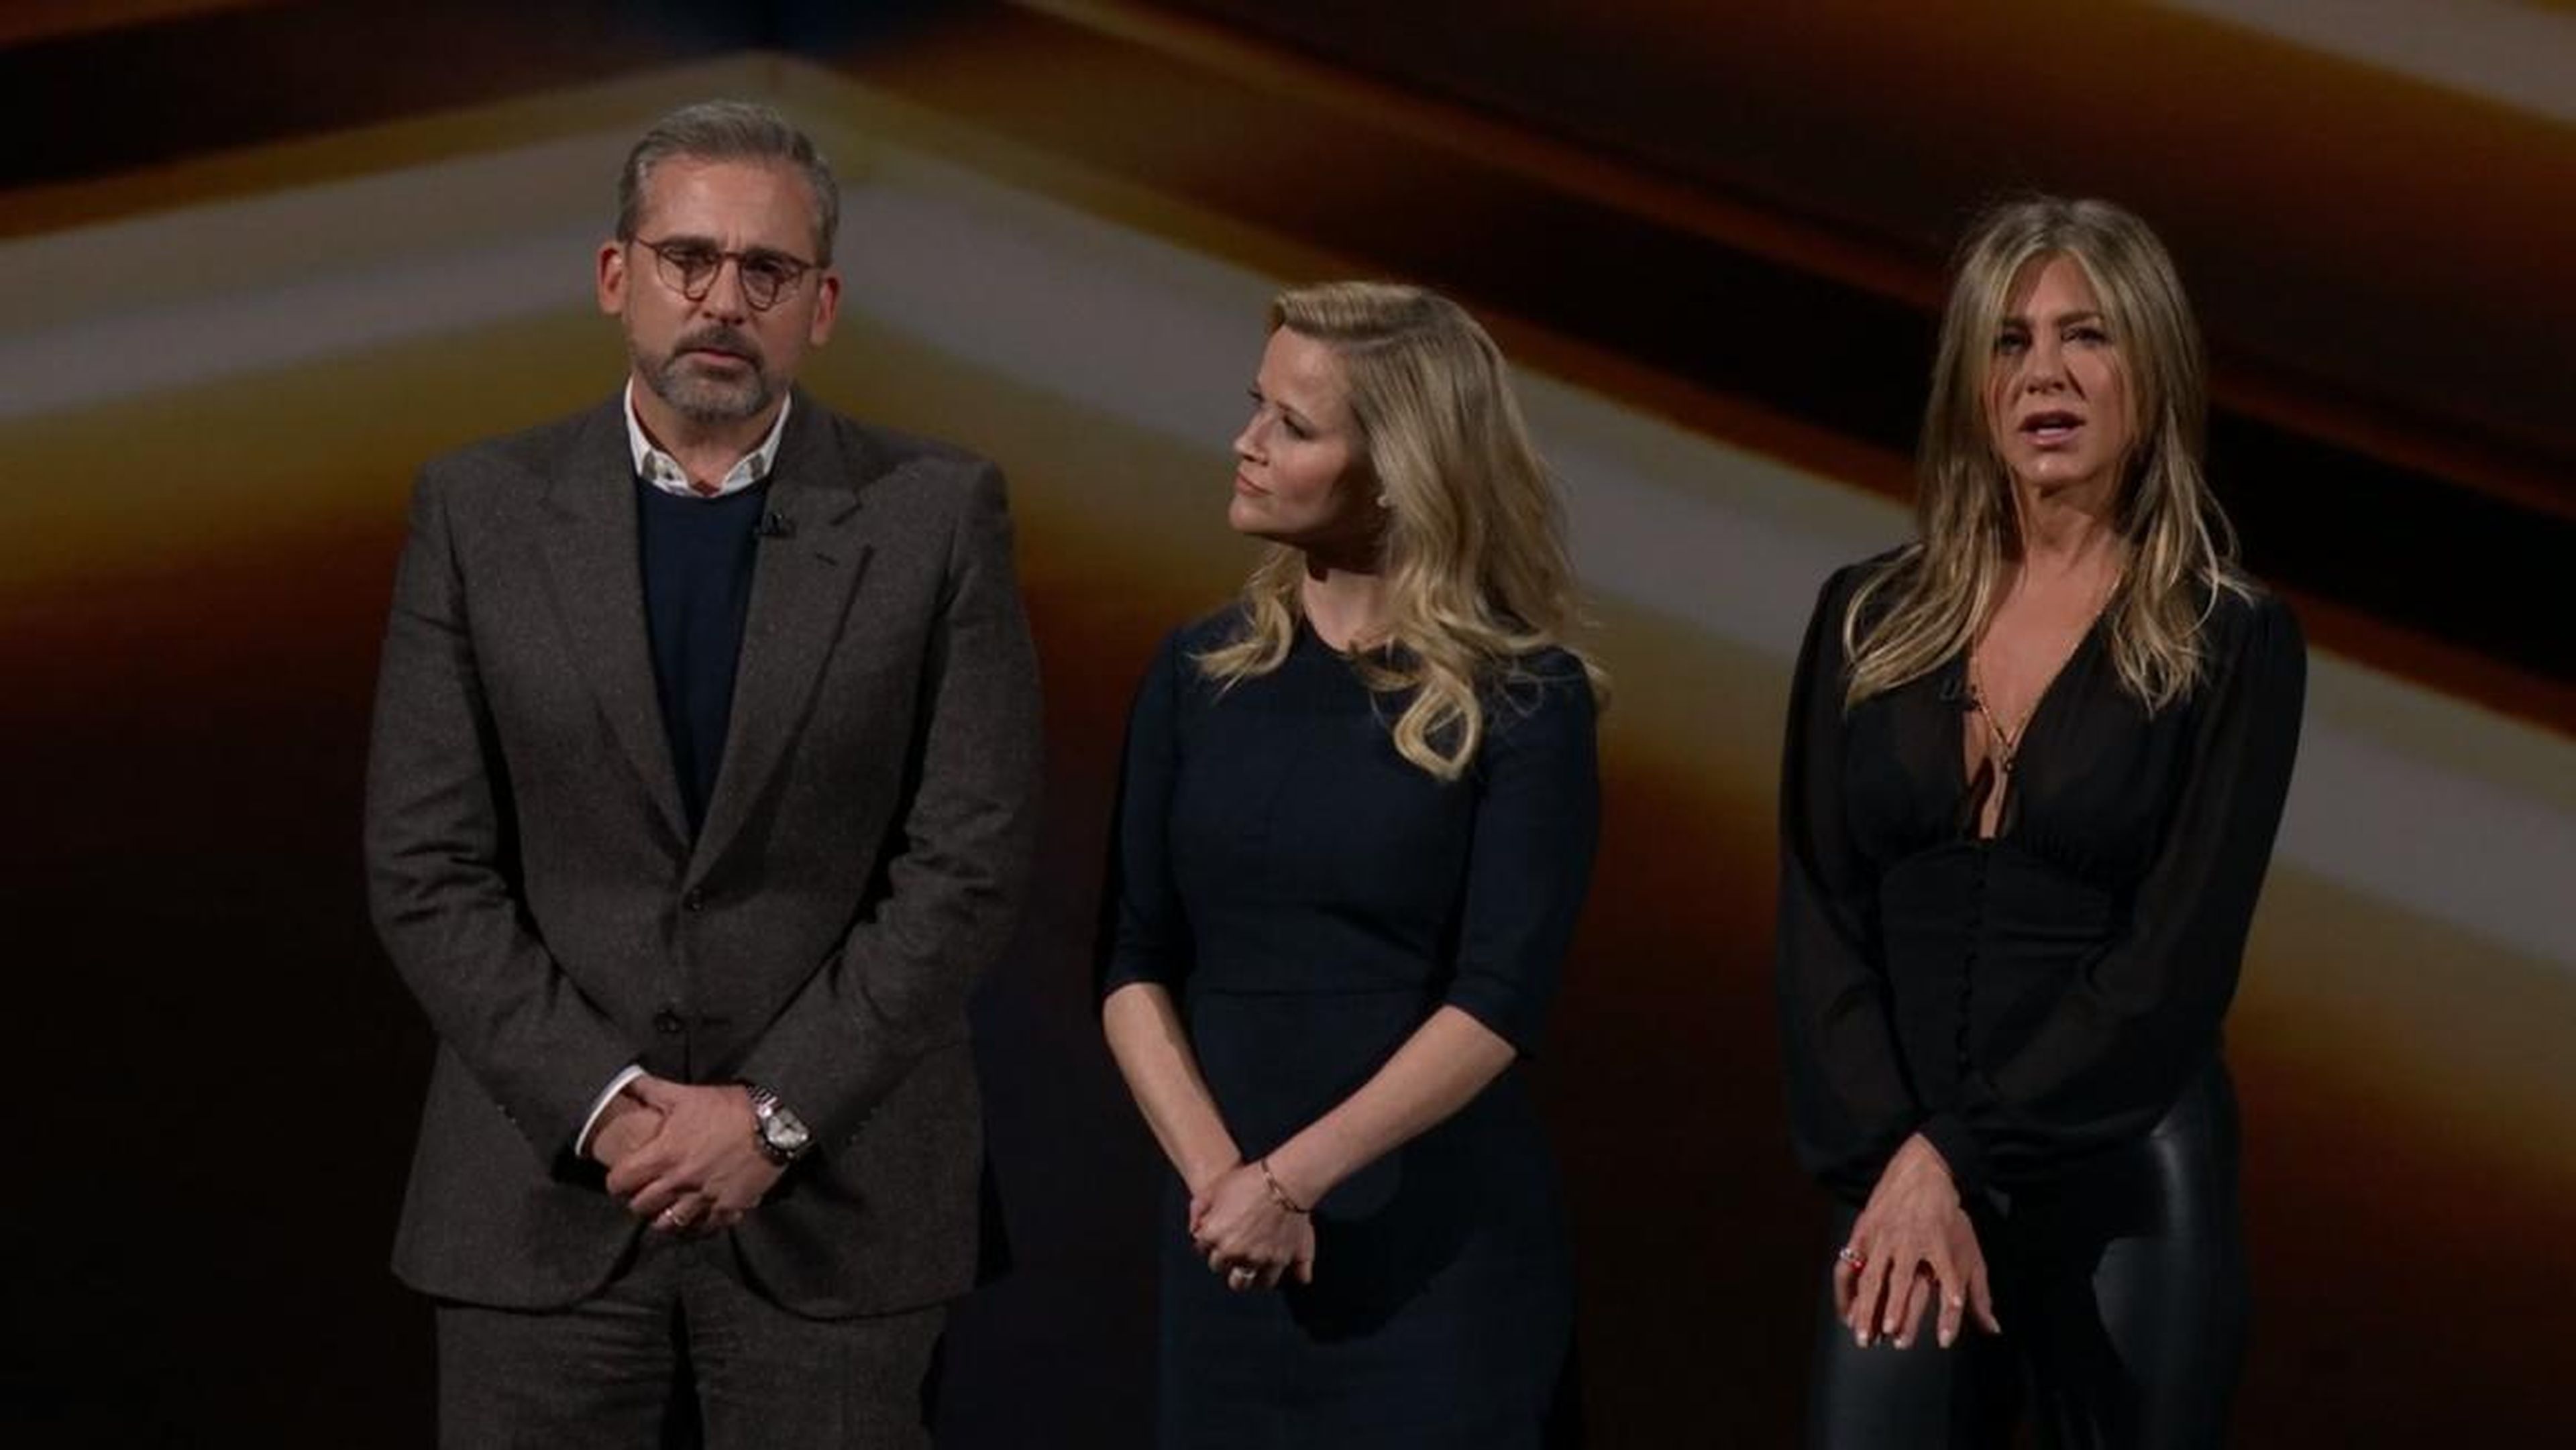 Jennifer Aniston, Reese Witherspoon, and Steve Carell unveiled "The Morning Show," a show about complex relationships between men and women on the set of a morning television show.